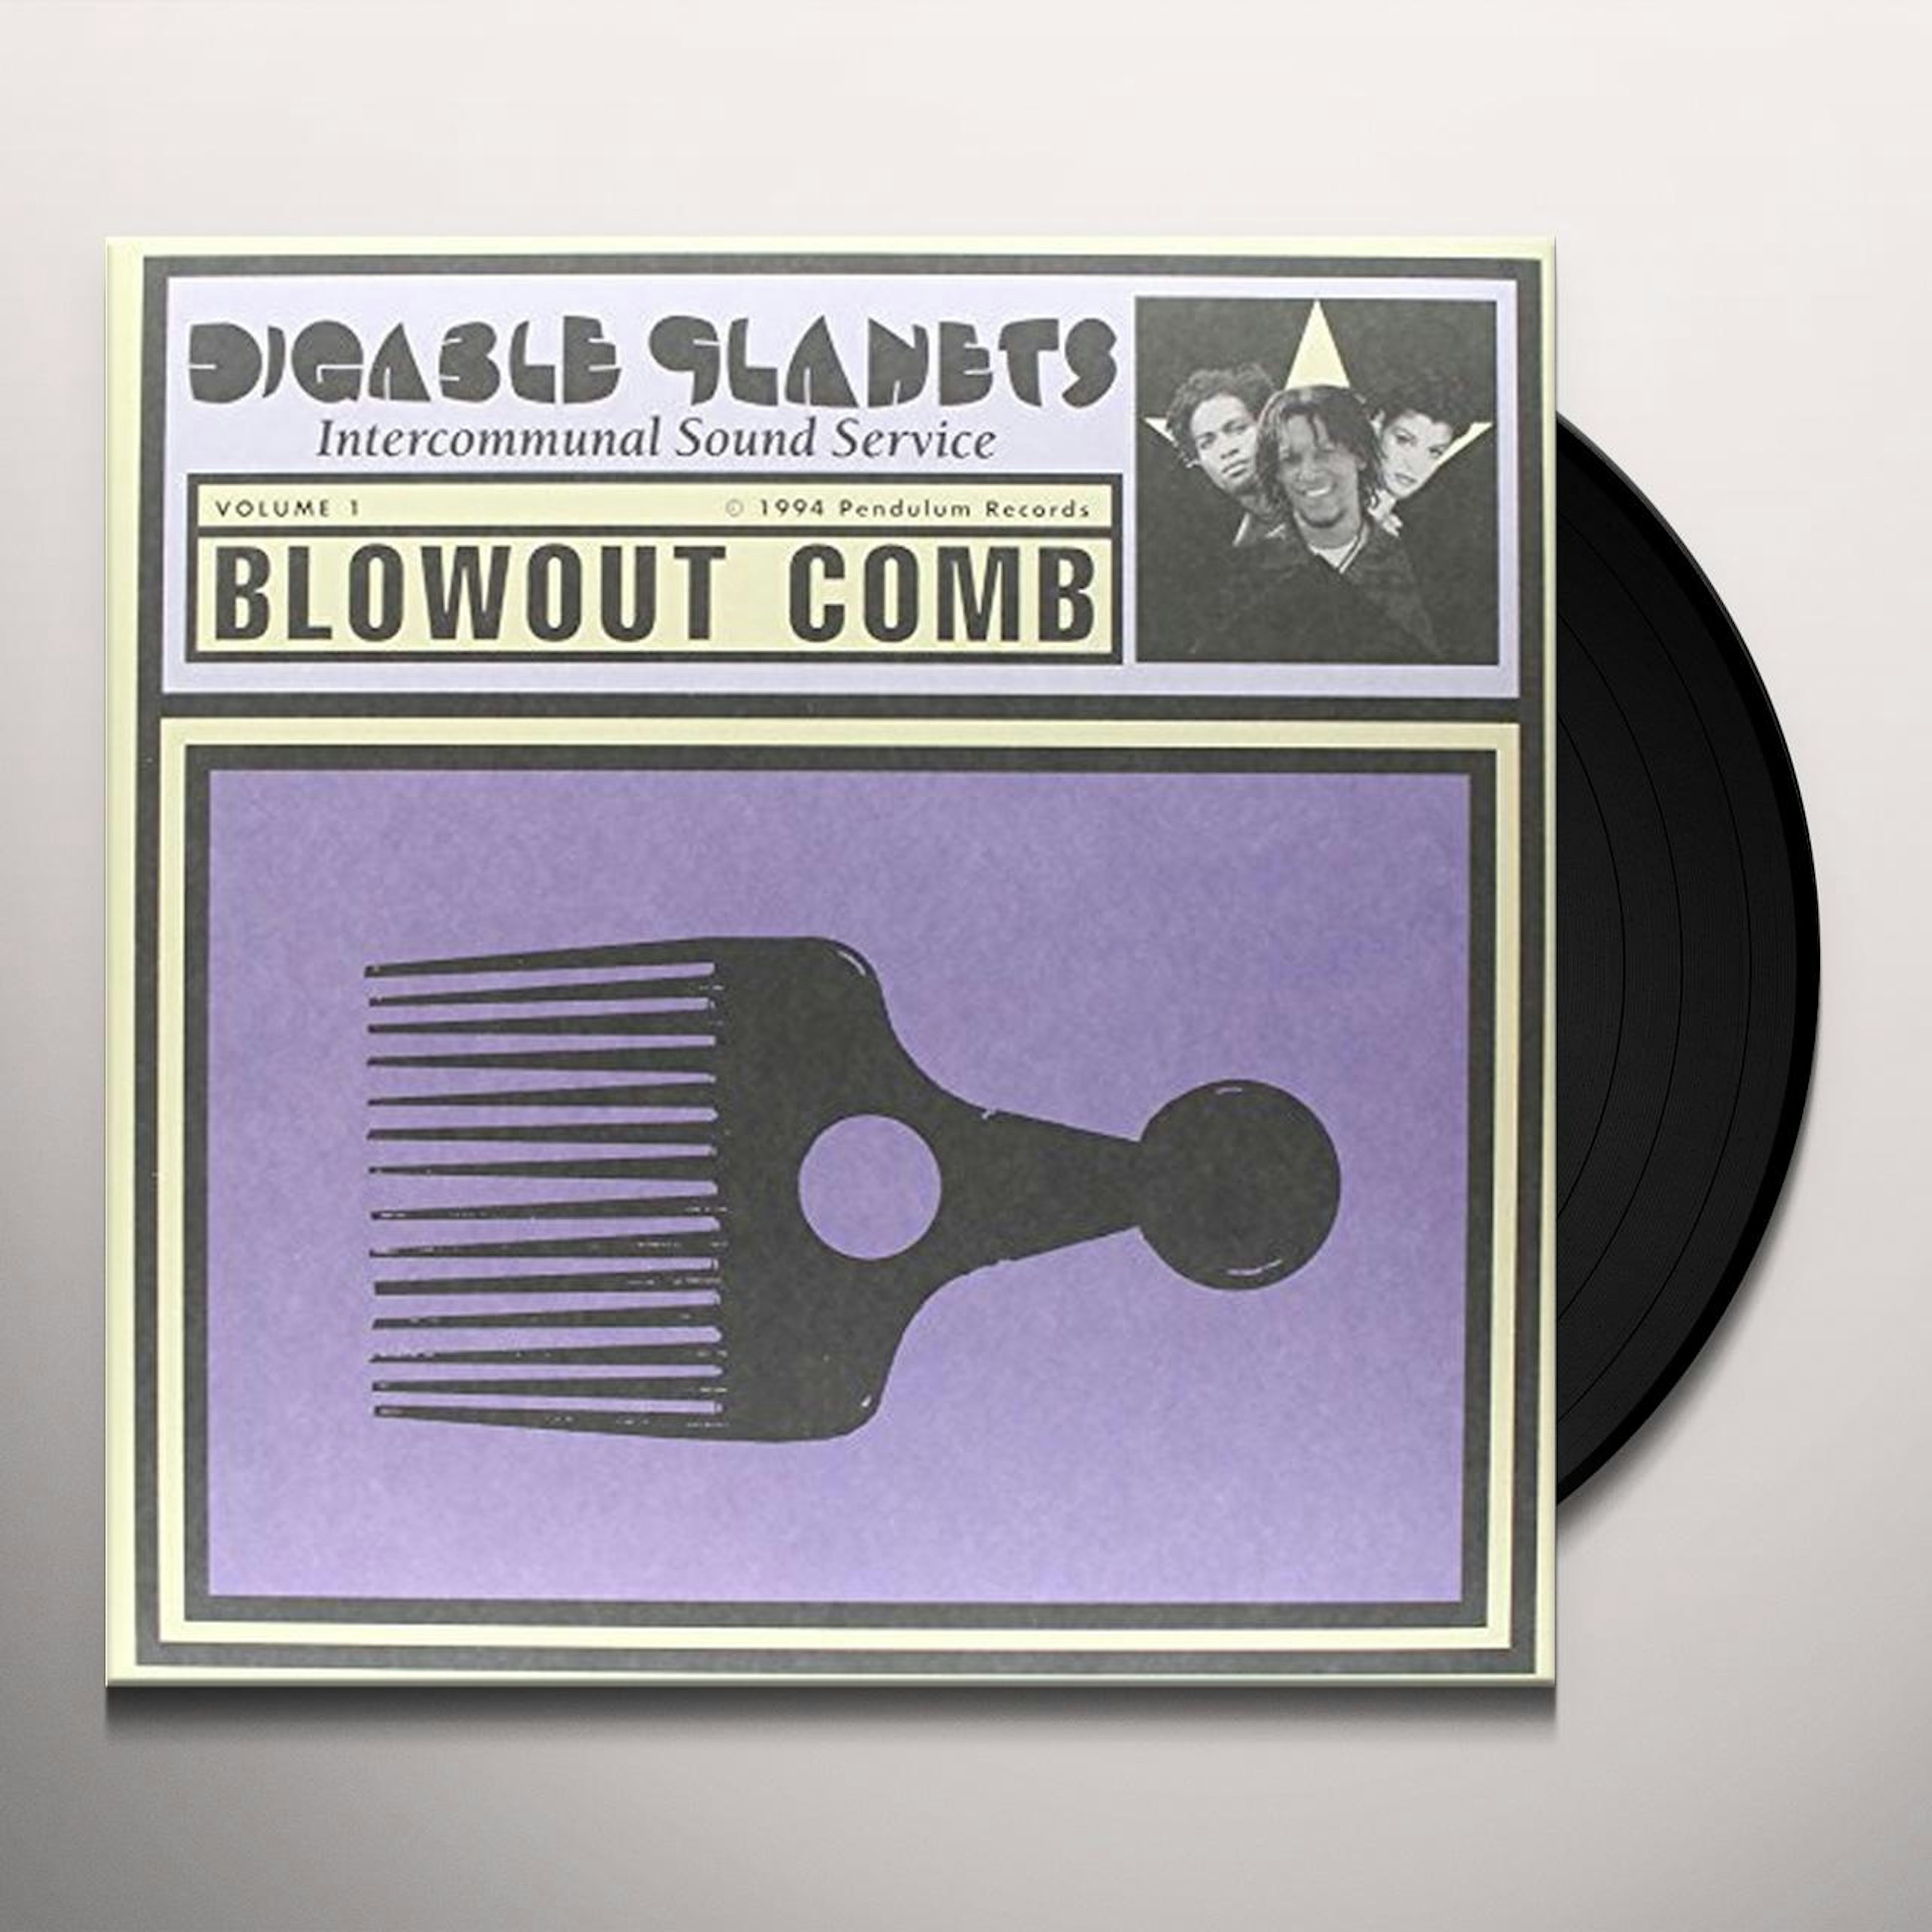 Planets Blowout Comb Record